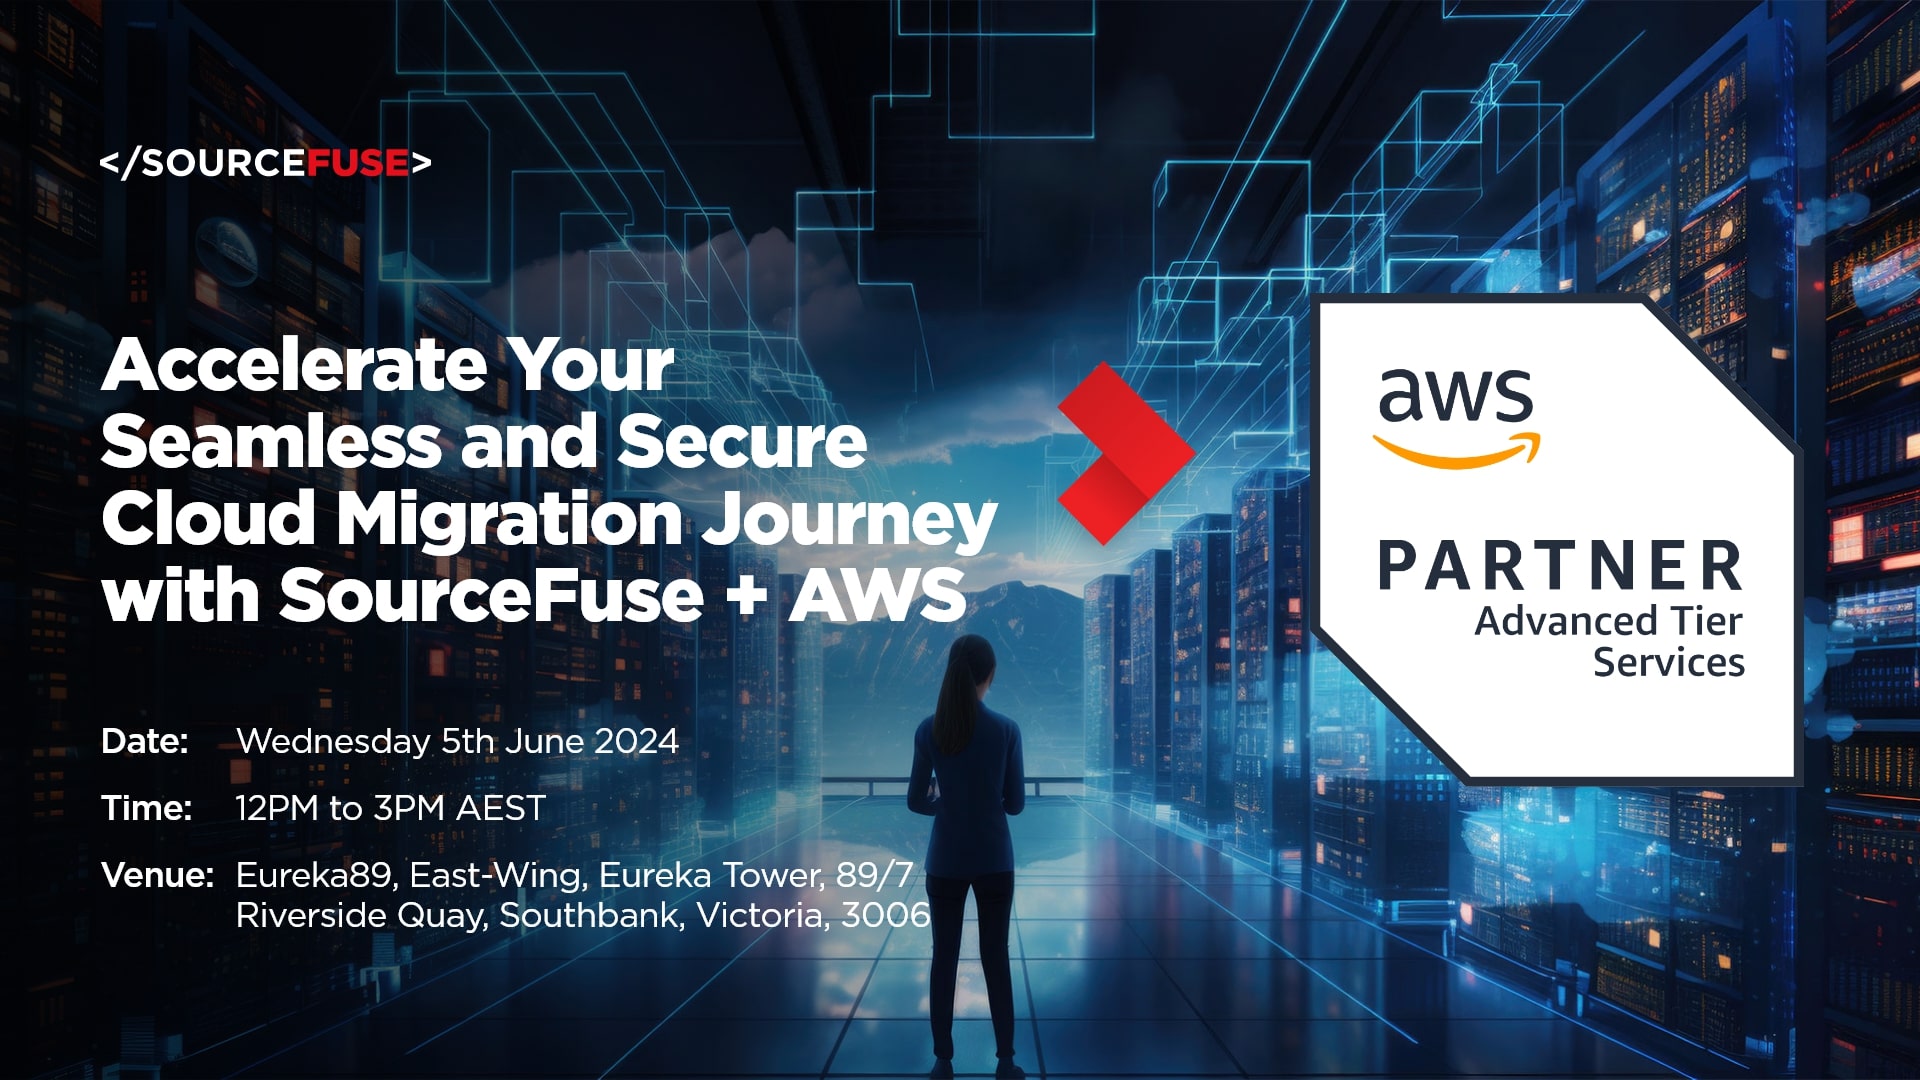 Accelerate Your Seamless and Secure Cloud Migration Journey with SourceFuse + AWS